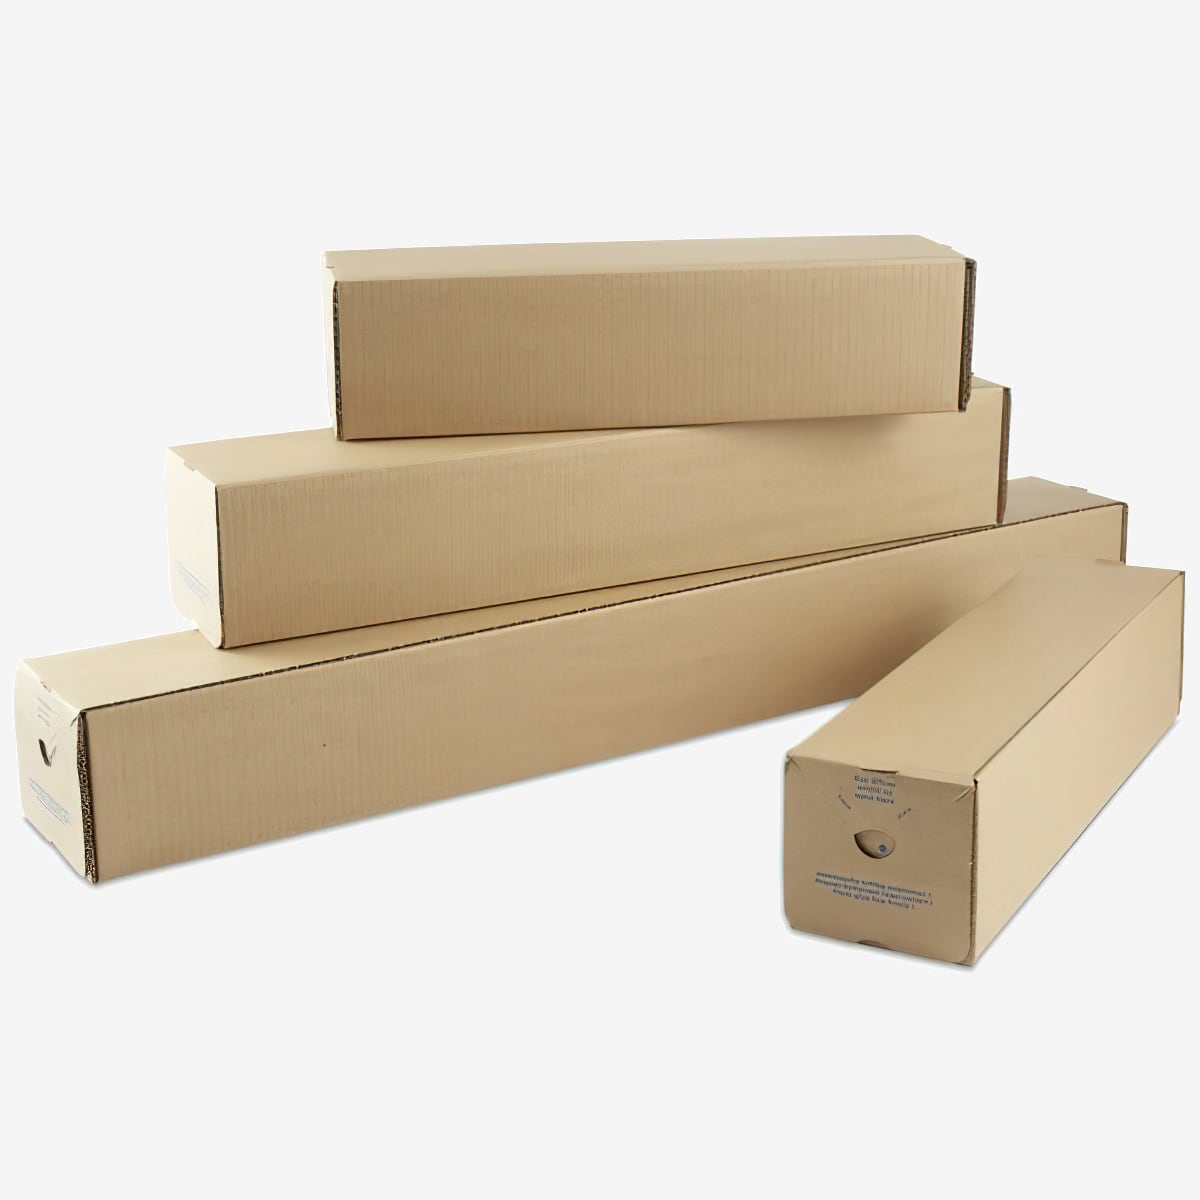 Shipping and mailing tubes